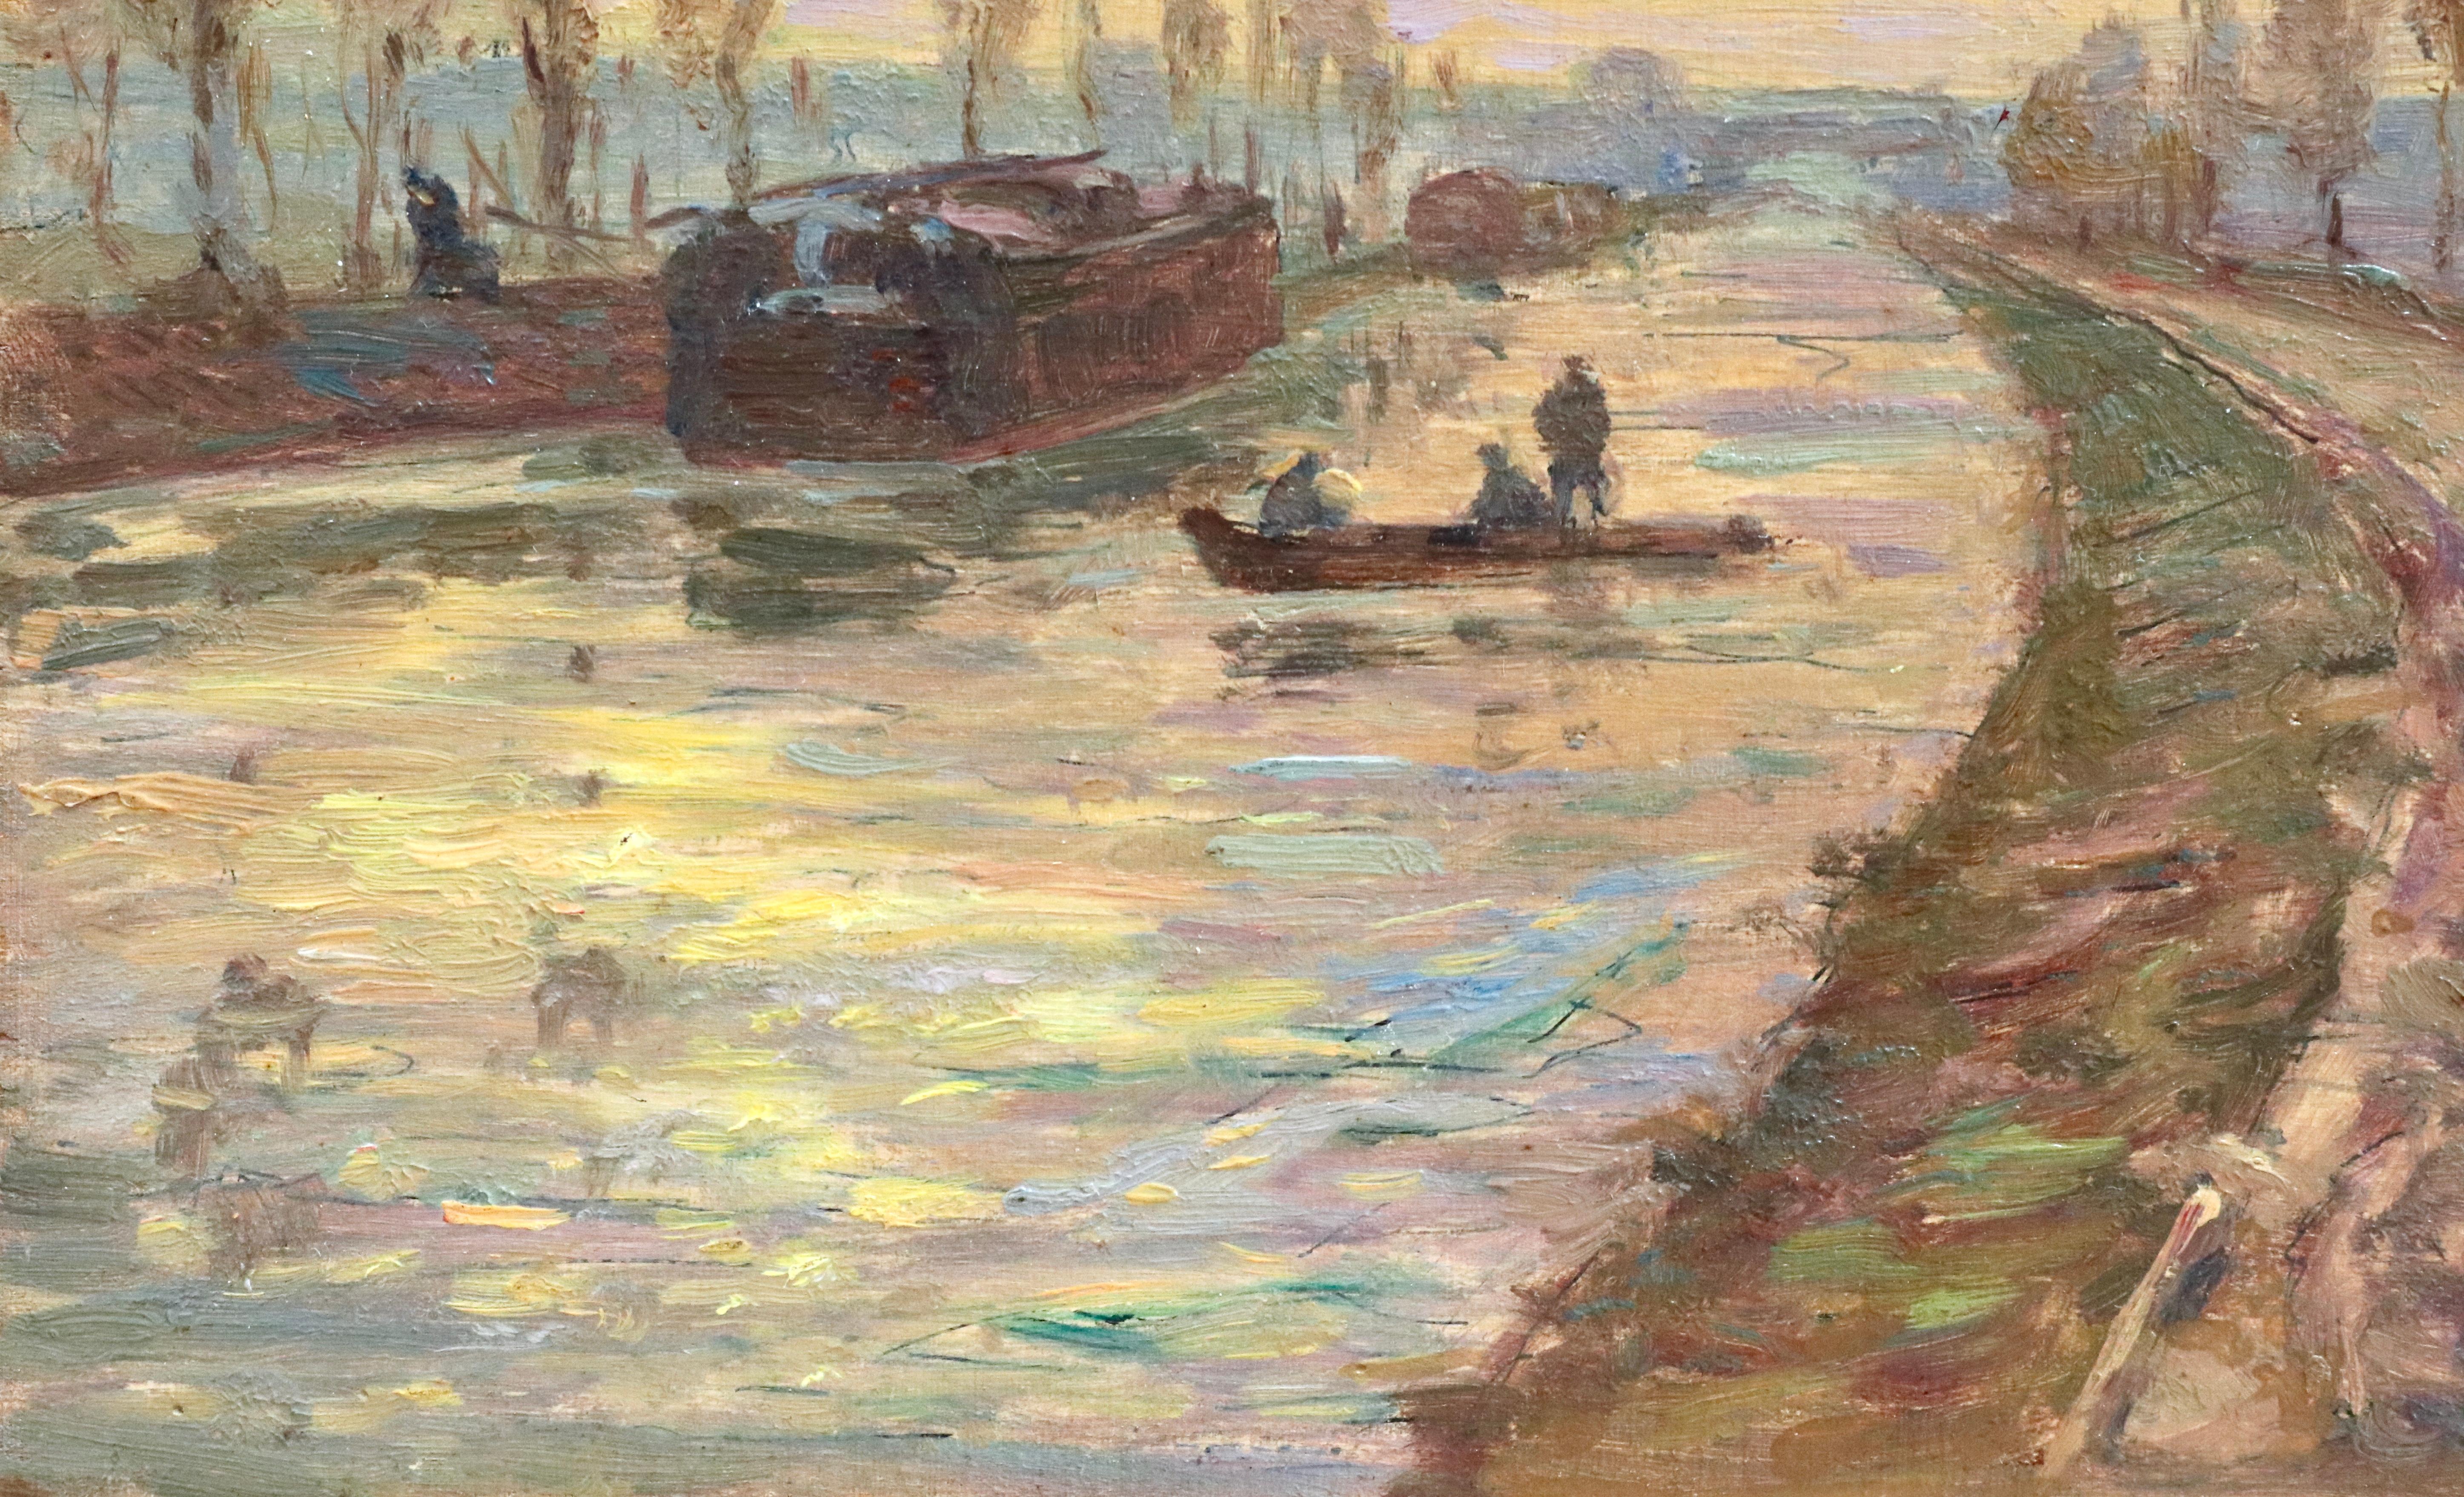 Sunset over the Canal - Douai - 19th Century Oil, Figures in Landscape by Duhem - Impressionist Painting by Henri Duhem